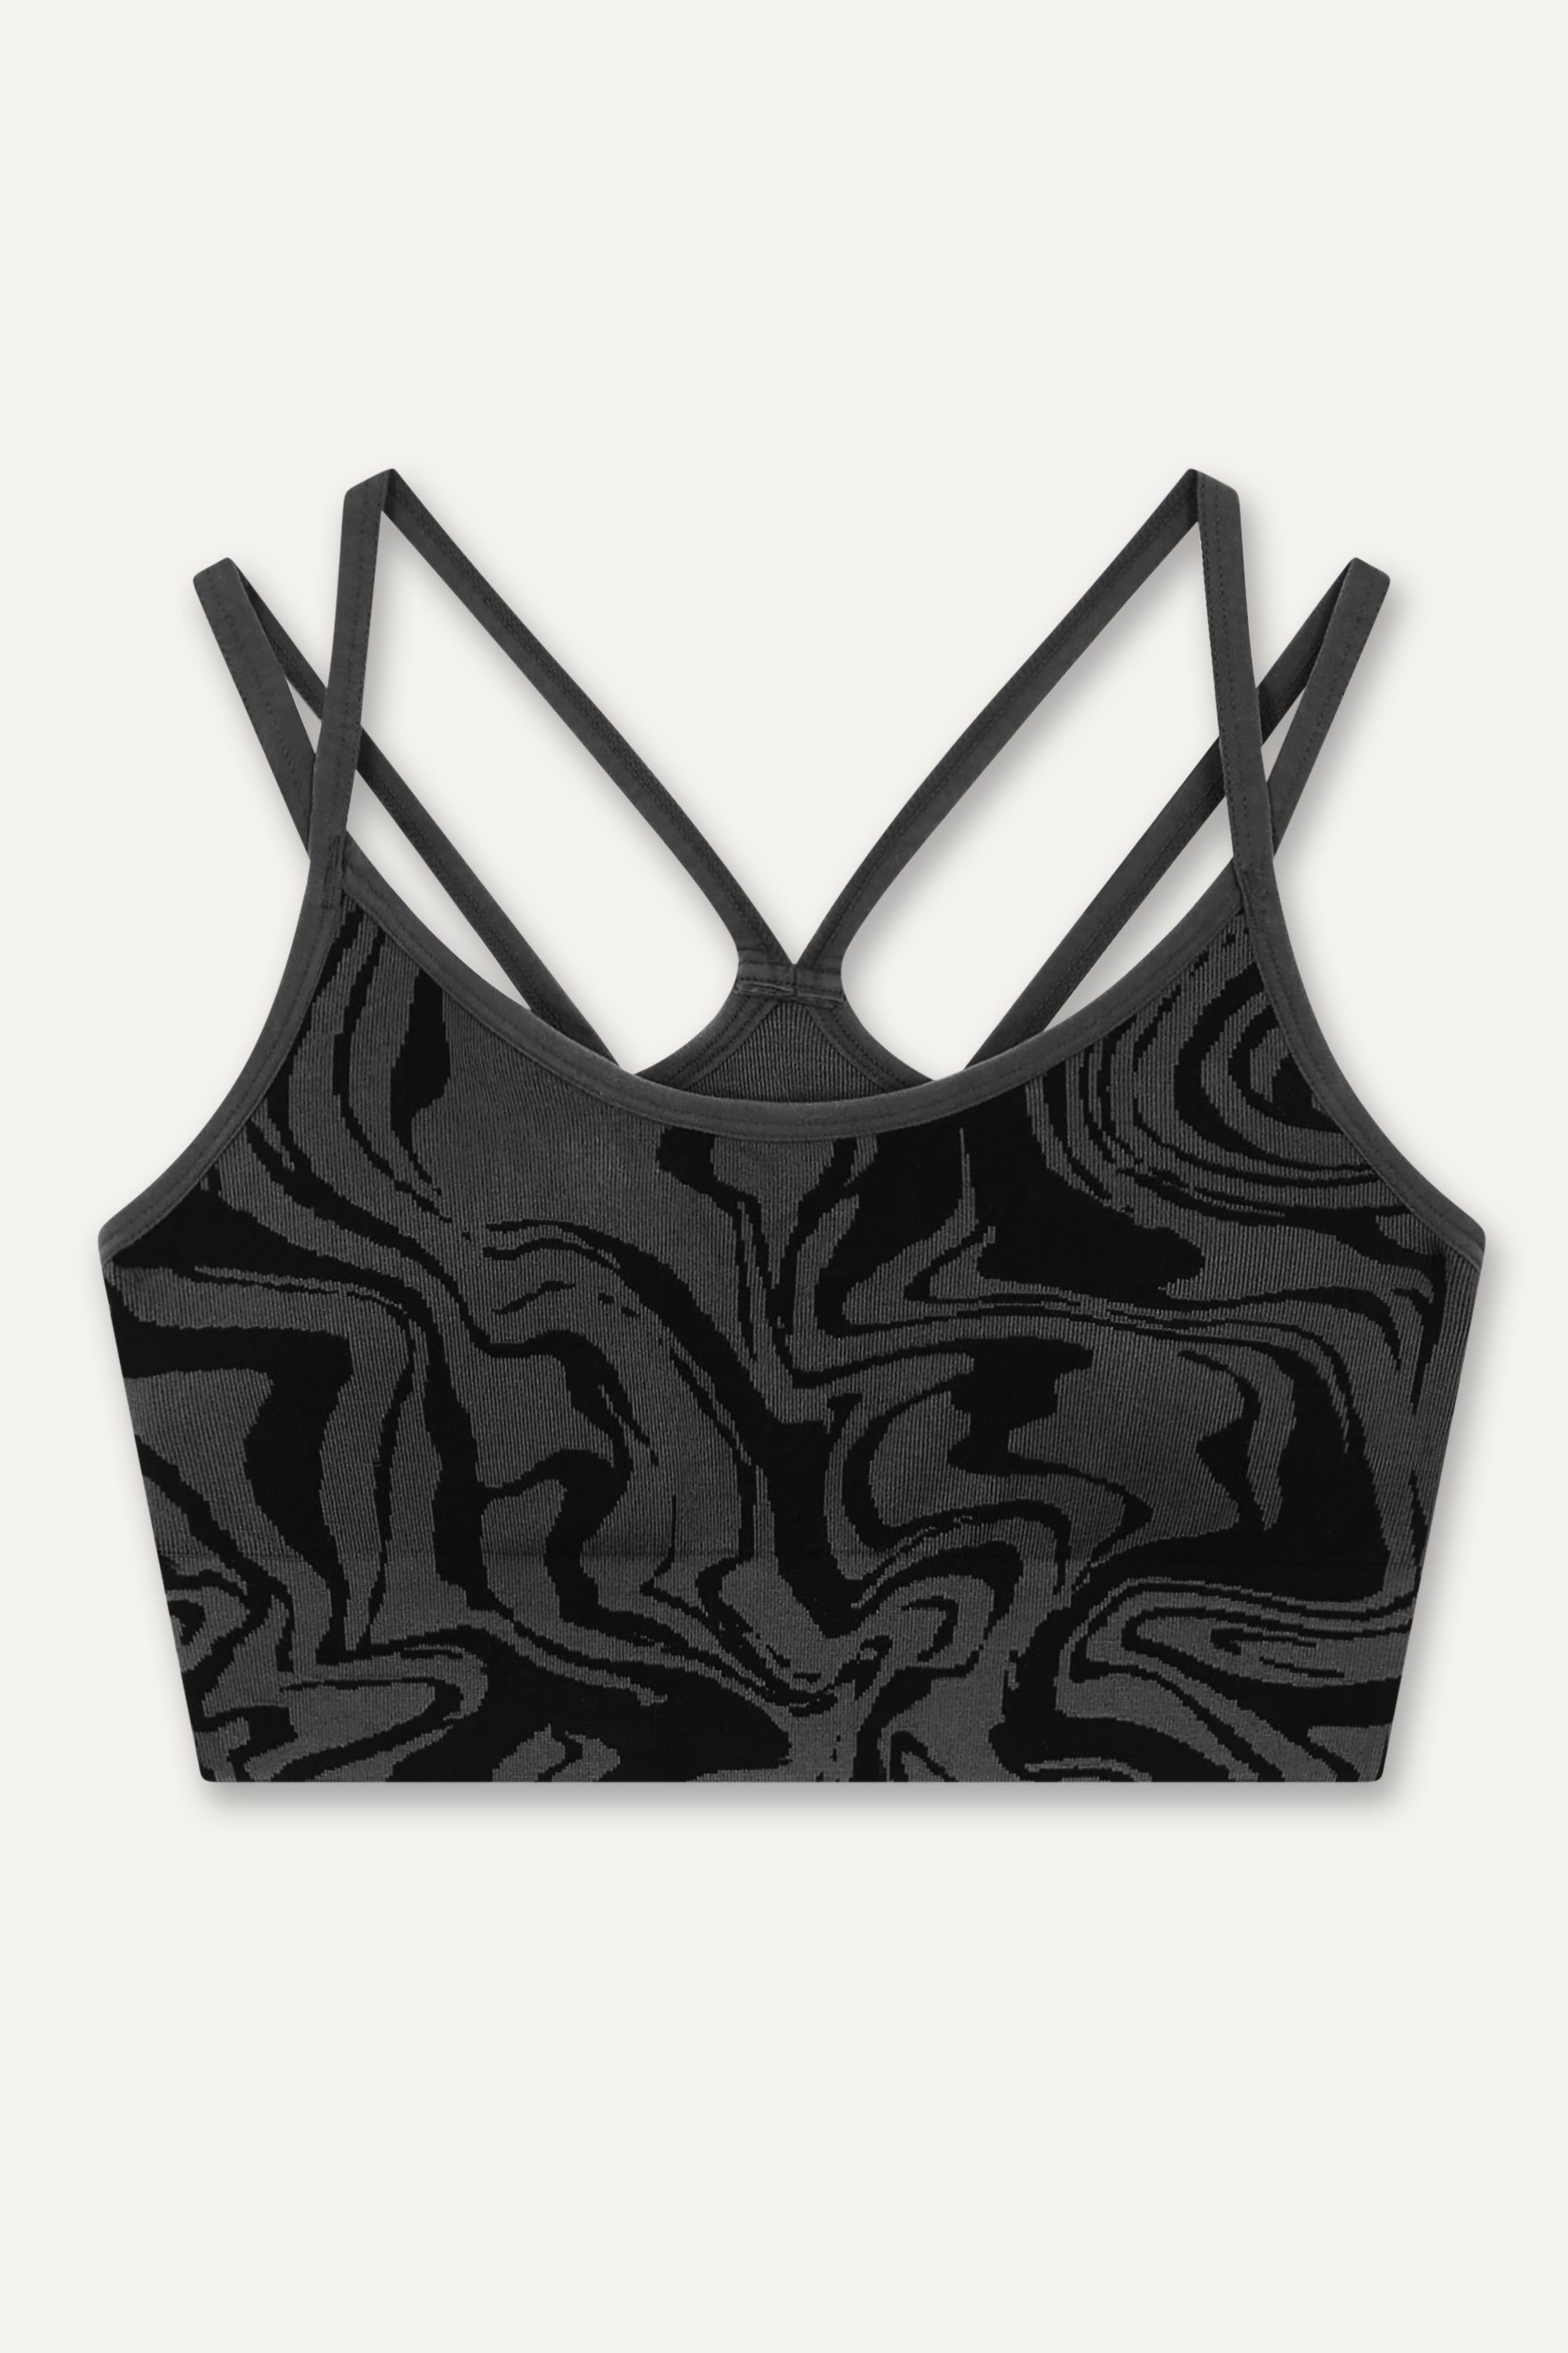 Black grey charcoal recycled seamless marble print low to medium impact supportive sports bra for yoga, pilates, spinning, weights, running and exercise by sustainable activewear brand Jilla Active 